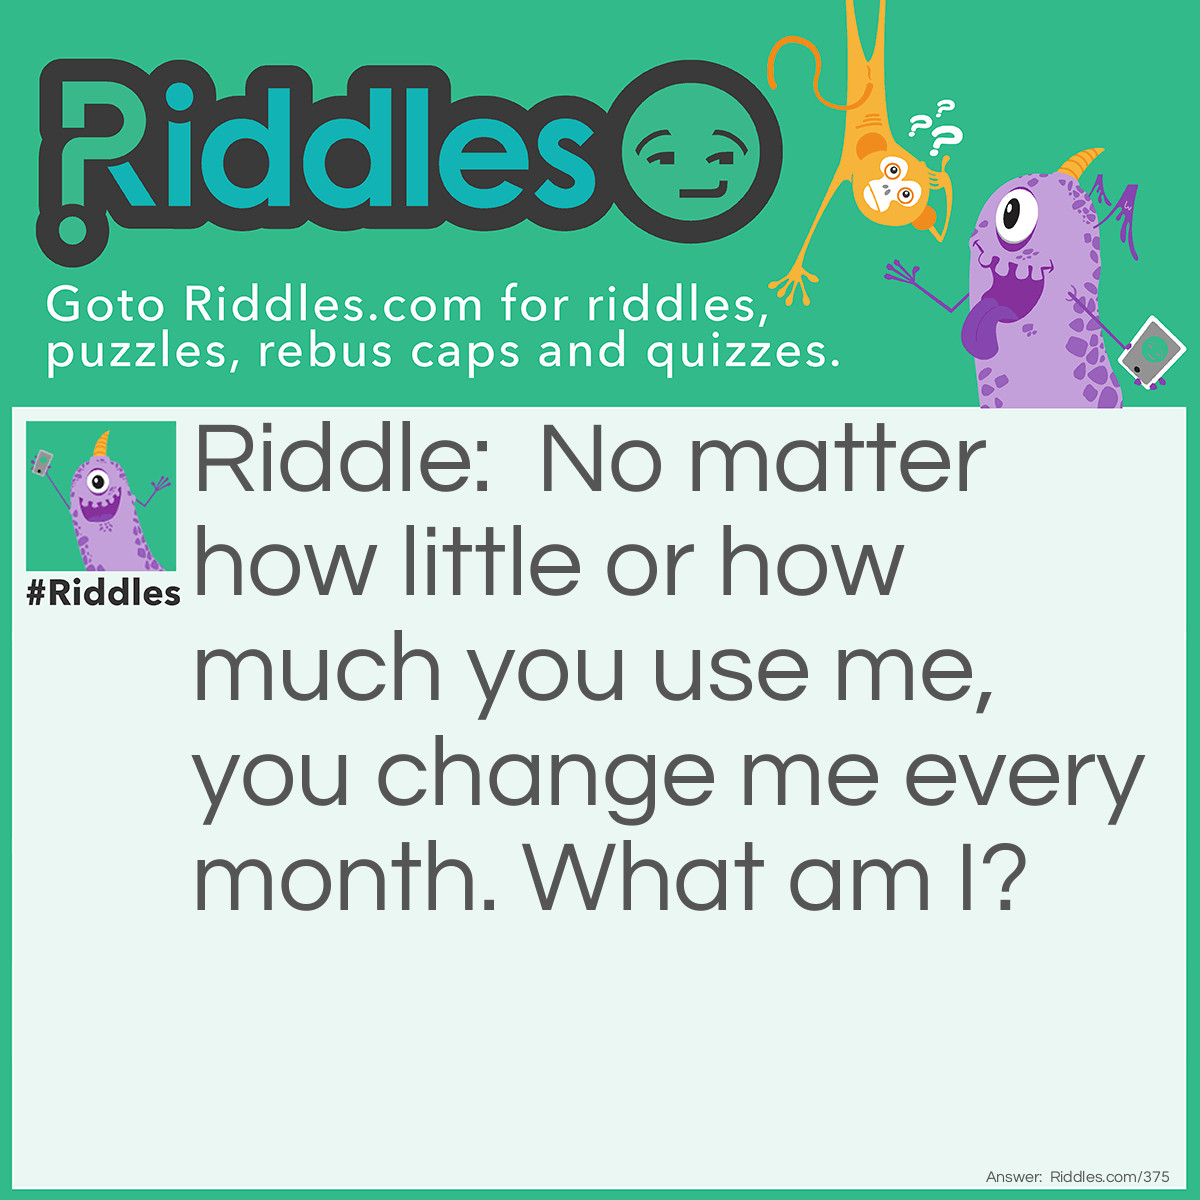 Riddle: No matter how little or how much you use me, you change me every month. What am I? Answer: A Calendar.